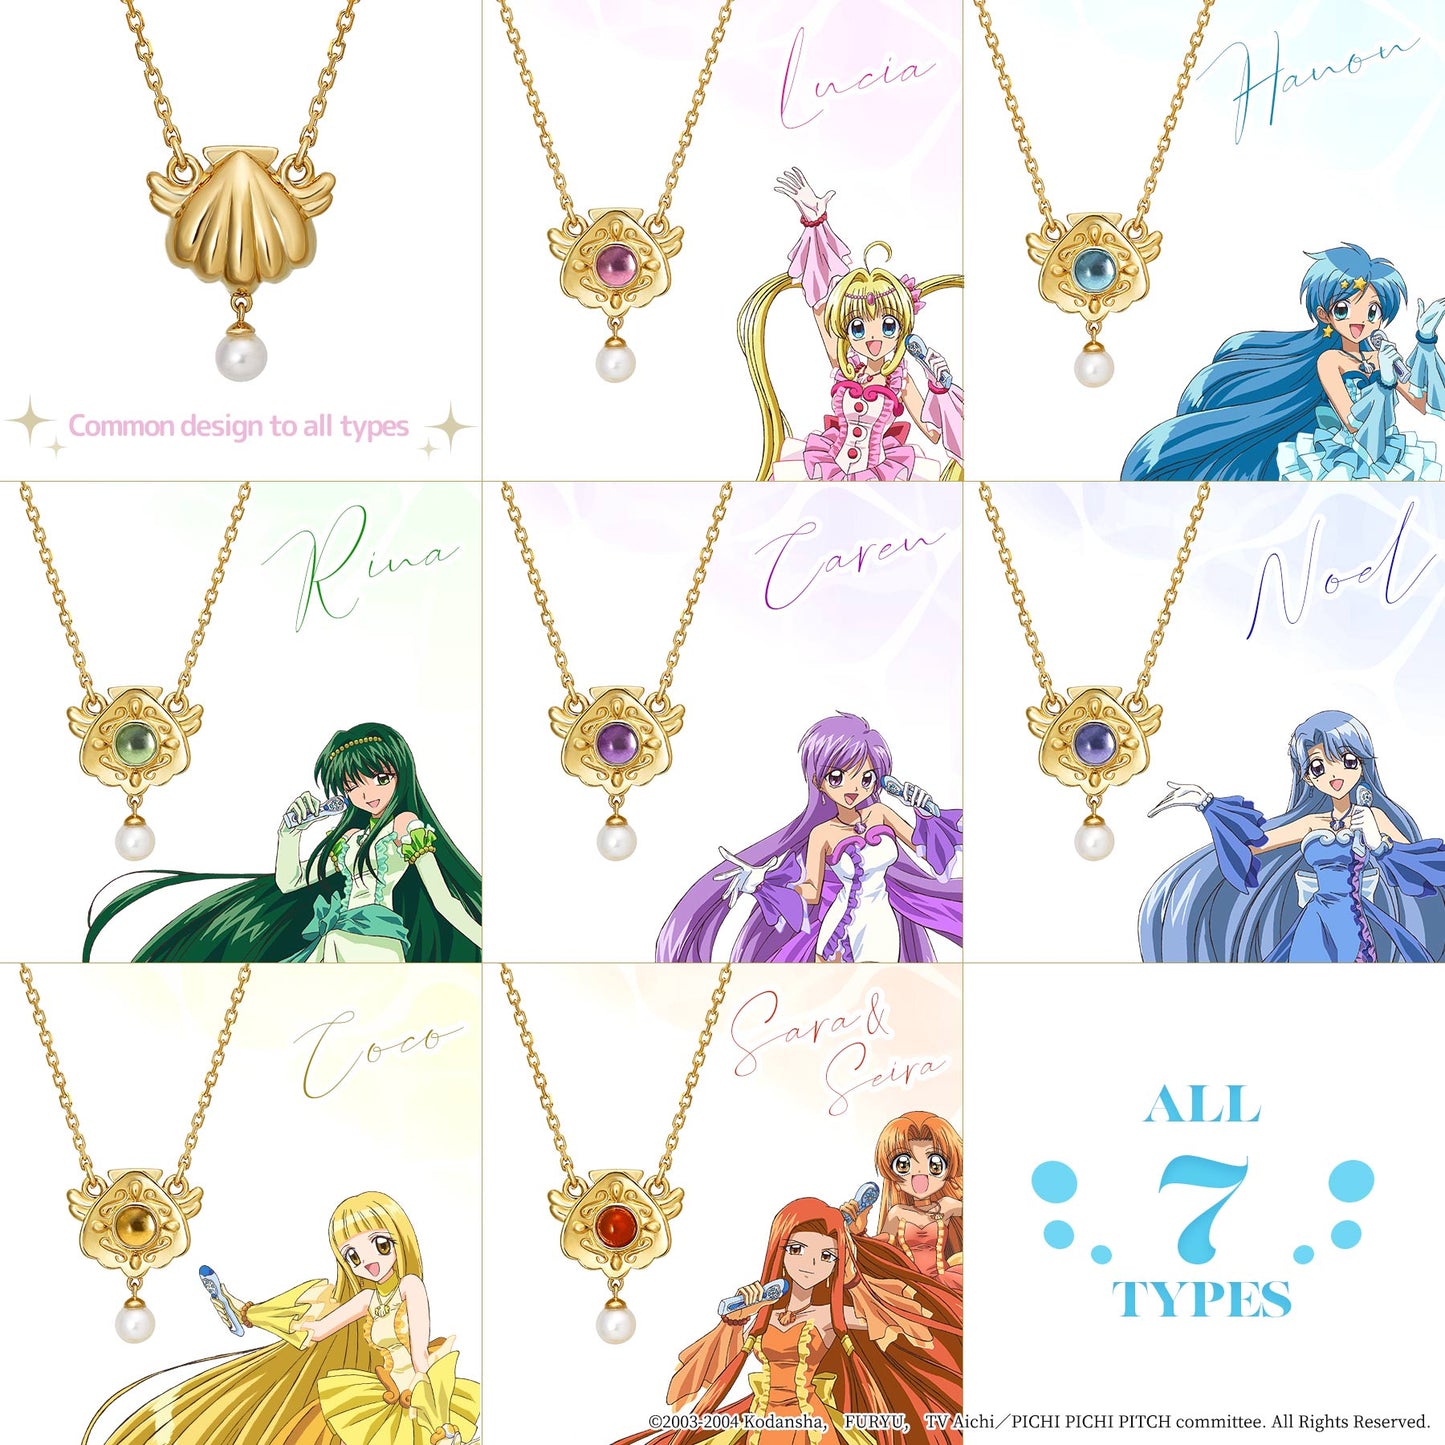 Mermaid Melody Pichi Pichi Pitch - Reversible Necklace (Hanon Hosho) - All Characters